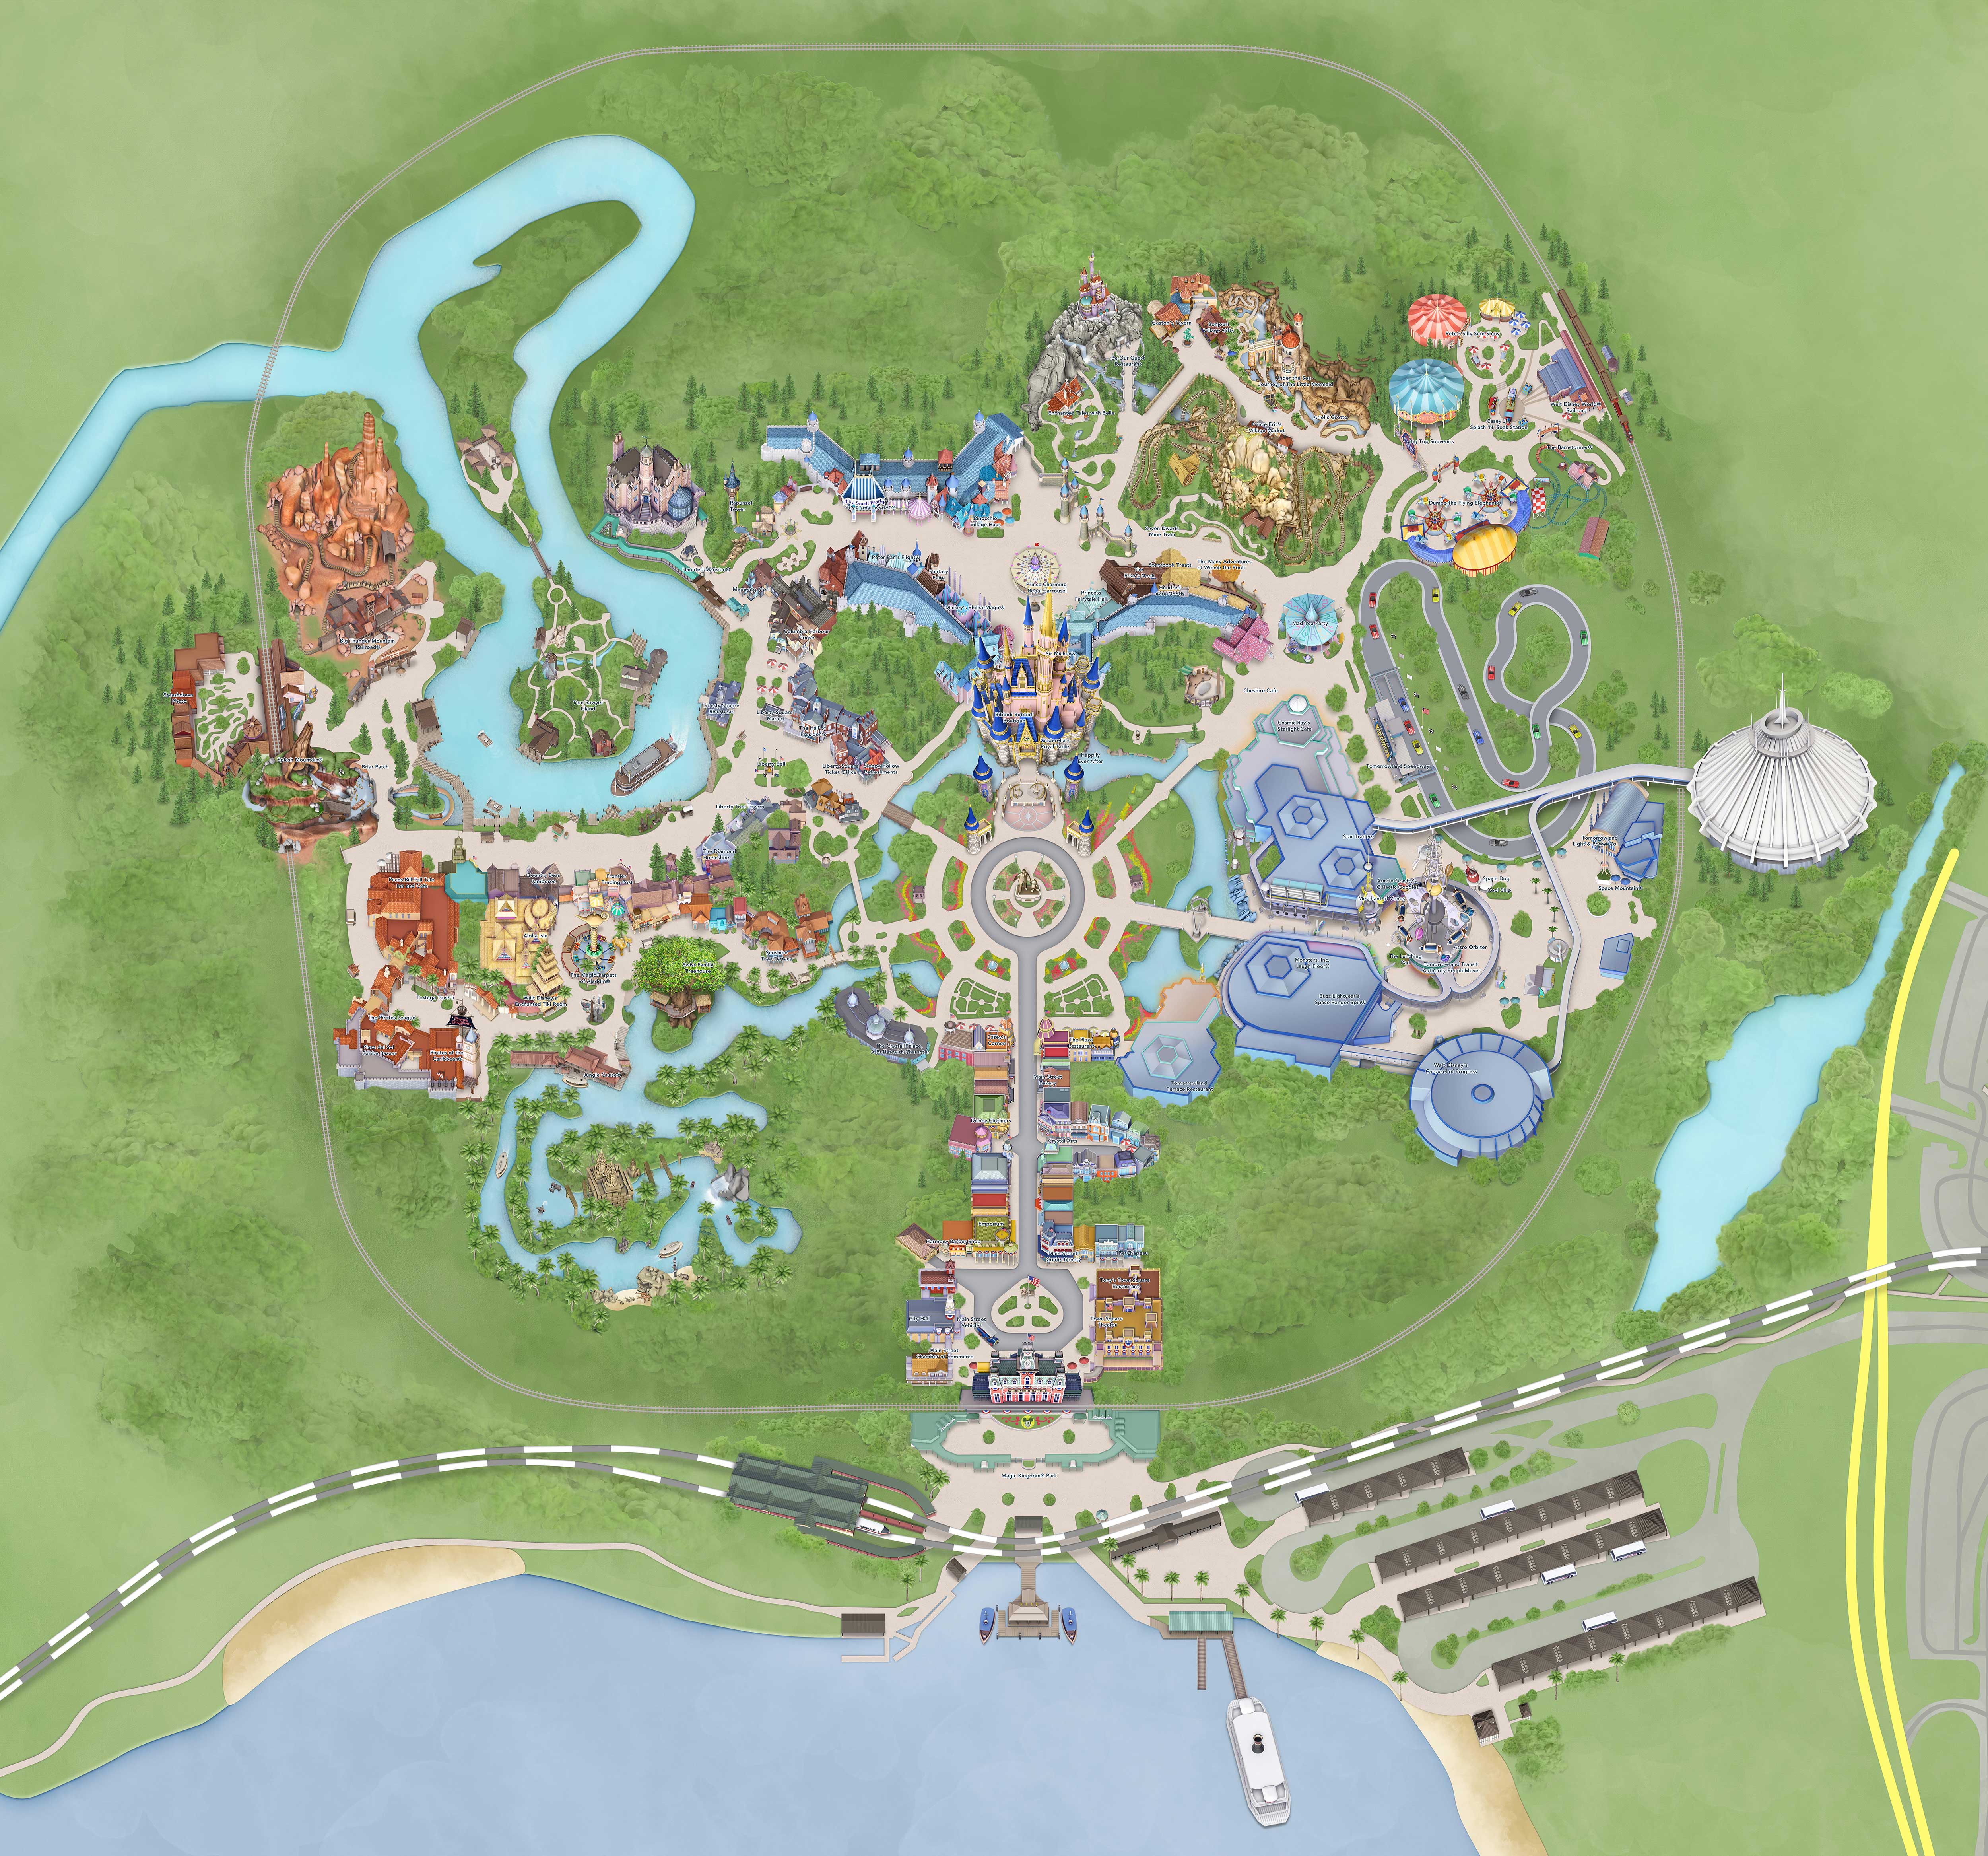 My Disney Experience digital map update for Magic Kingdom includes new